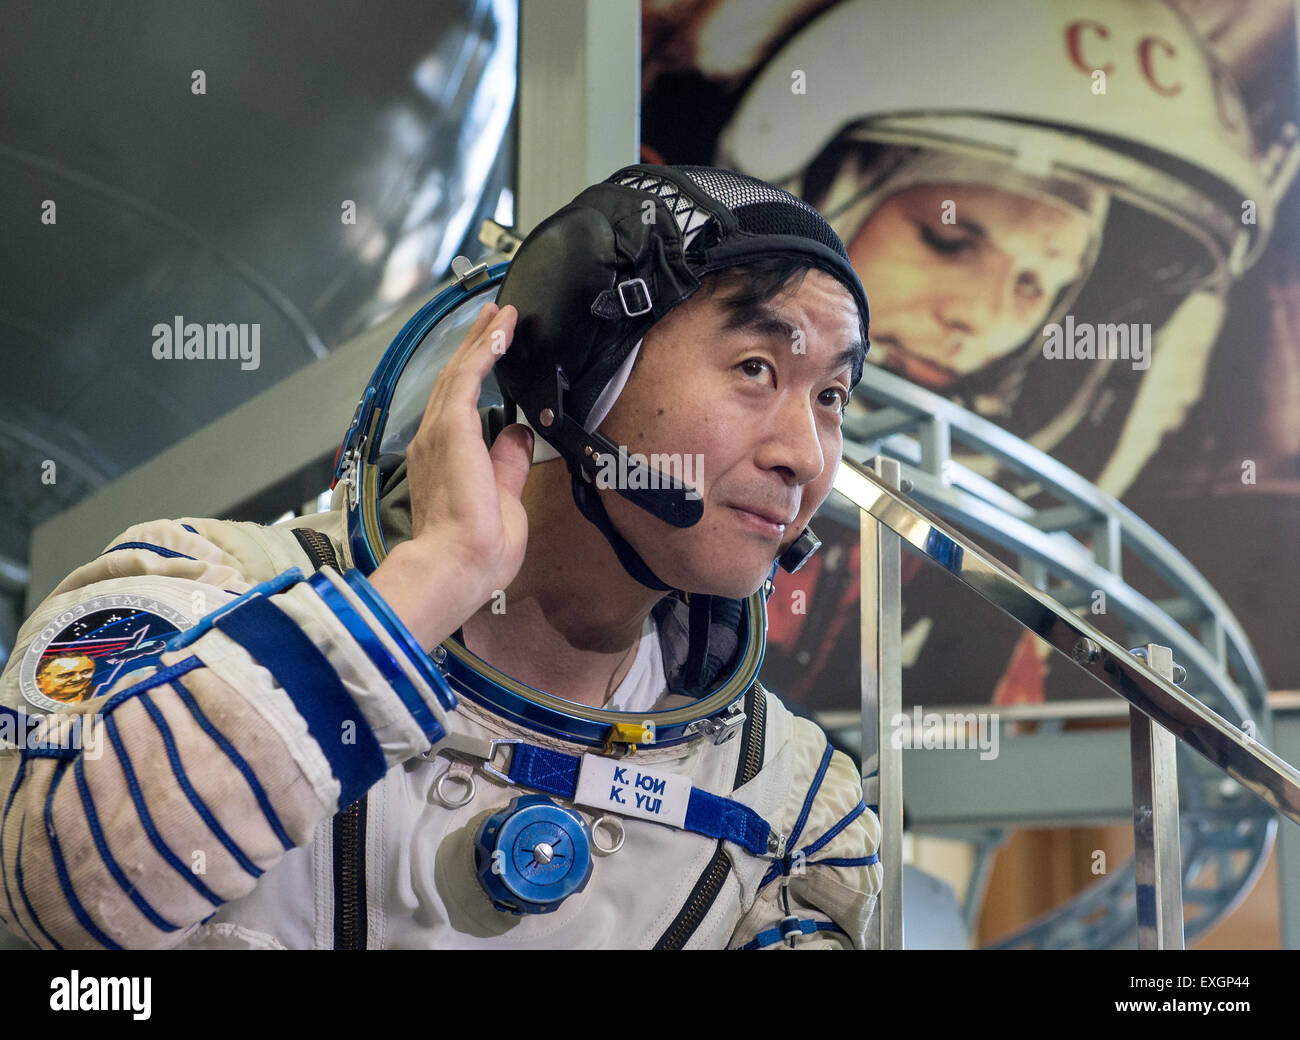 Japan Aerospace Exploration Agency astronaut Kimiya Yui listens to a report's question during the second day of qualification exams with NASA astronaut Kjell Lindgren and Russian cosmonaut Oleg Kononenko, Thursday, May 7, 2015 at the Gagarin Cosmonaut Training Center (GCTC) in Star City, Russia. The Expedition 44/45 trio is preparing for launch to the International Space Station in their Soyuz TMA-17M spacecraft from the Baikonur Cosmodrome in Kazakhstan. Stock Photo